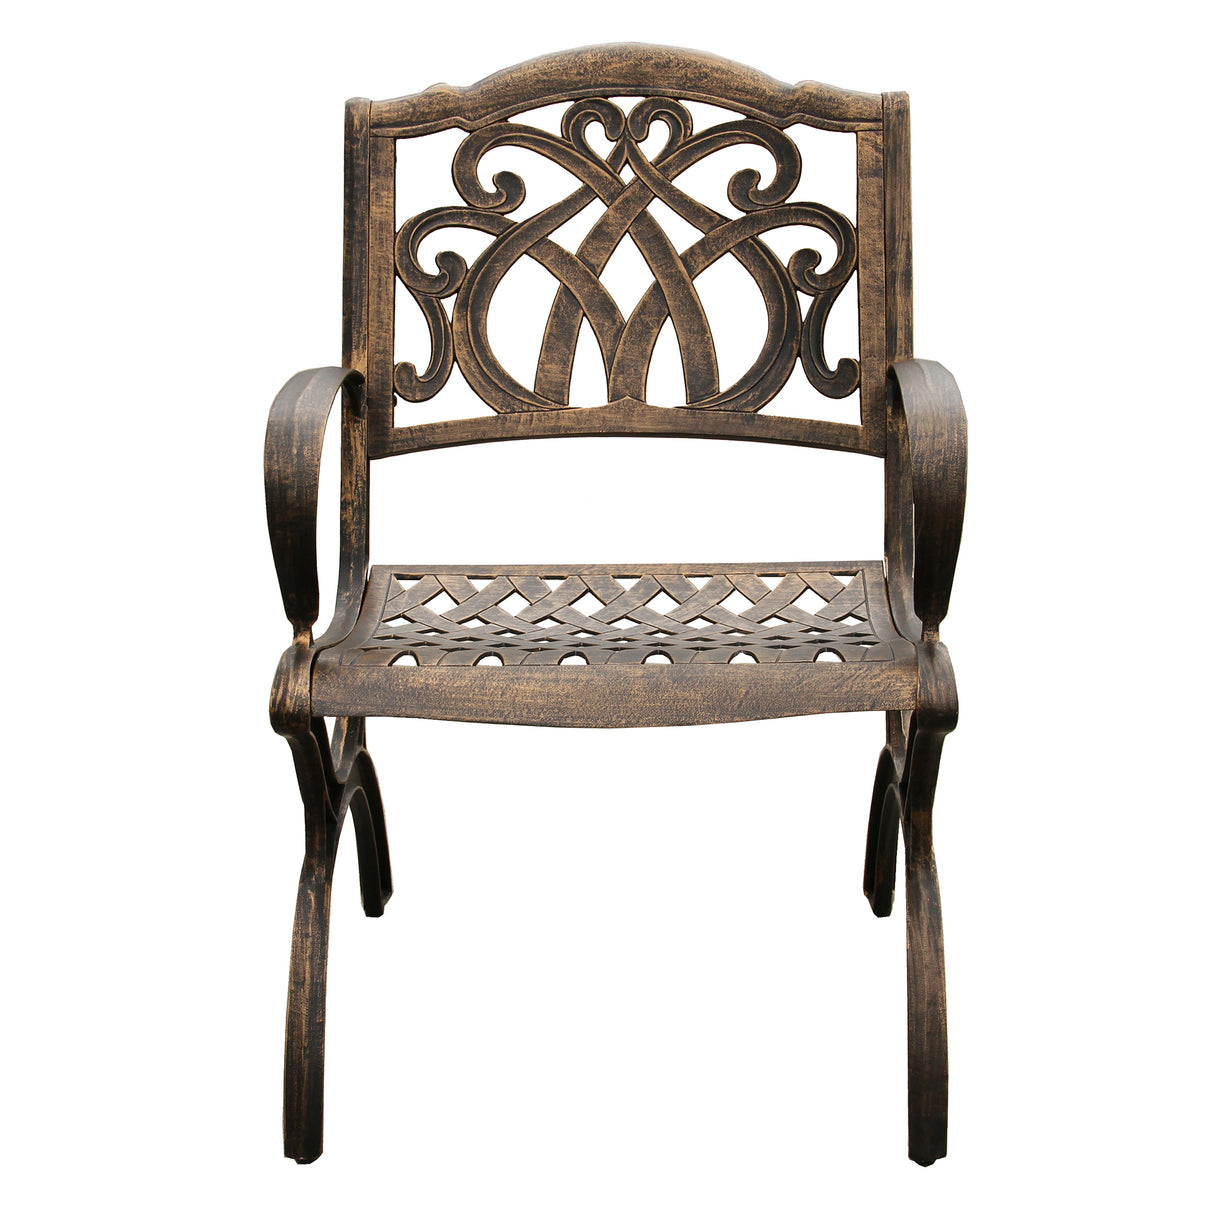 Ornate Traditional Outdoor Cast Aluminum Patio Dining Chair